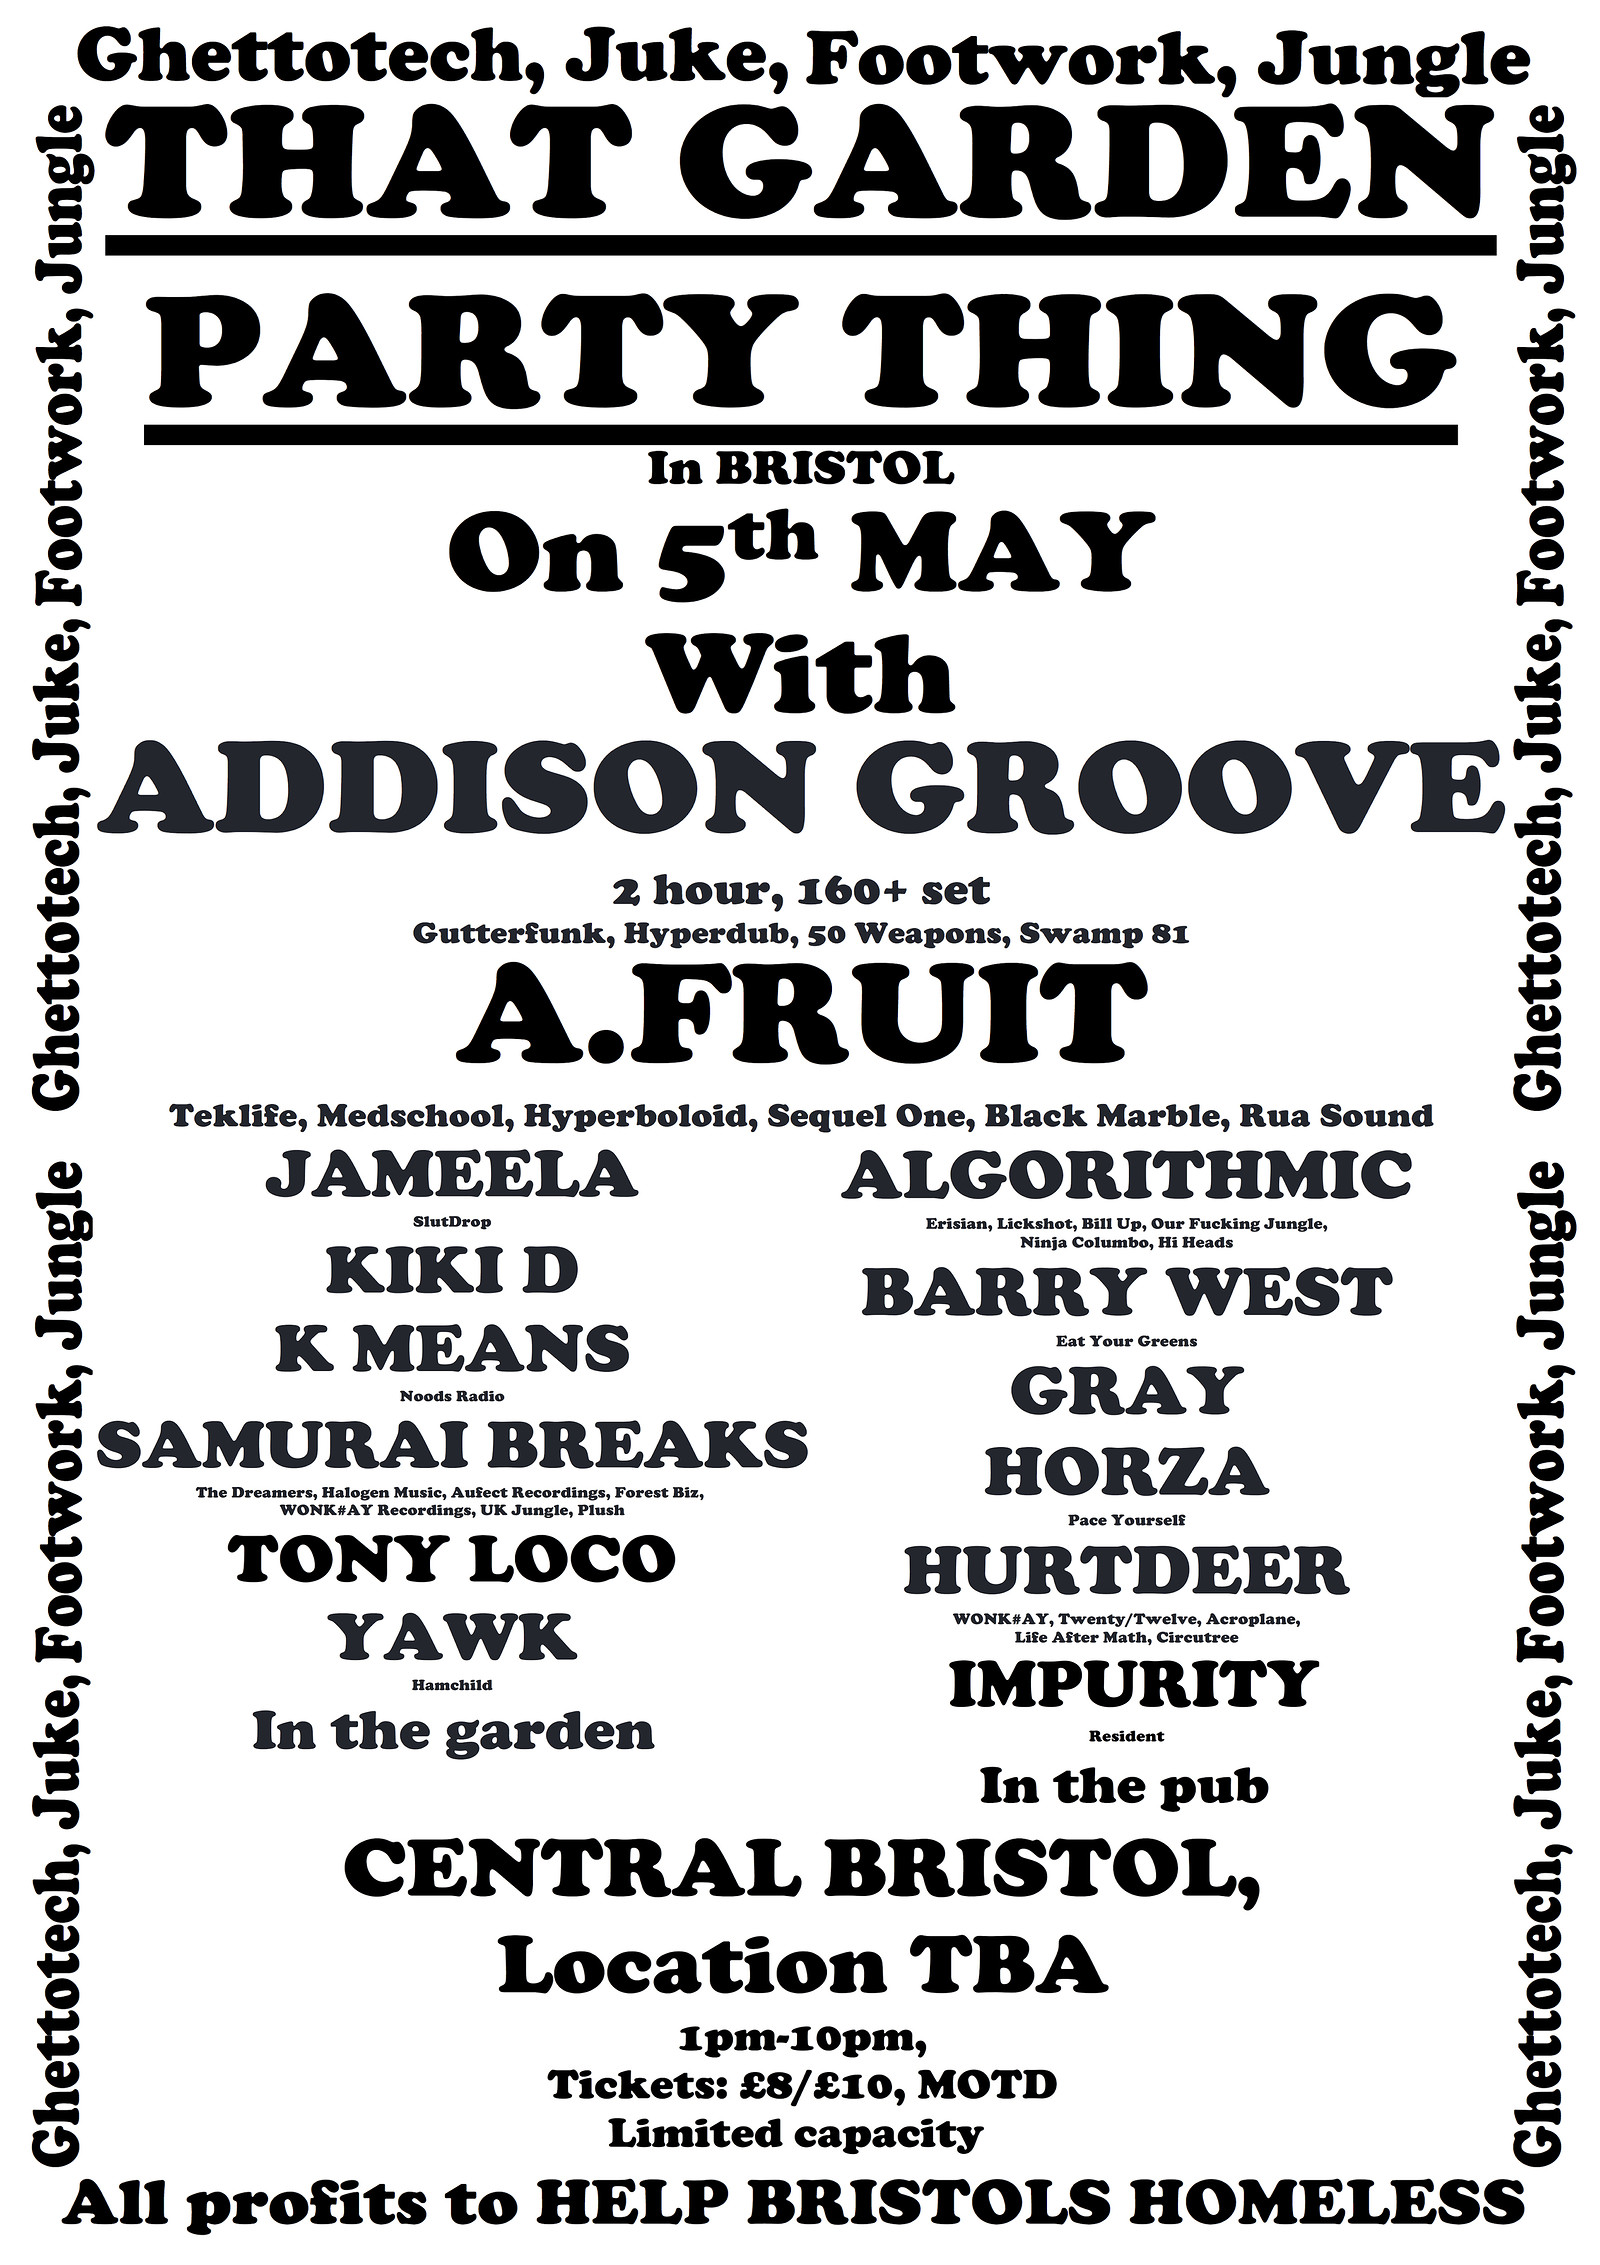 That Garden Party Thing w/ Addison Groove, A.Fruit at Rhubarb Tavern, Queen Ann Rd, BS5 9TX